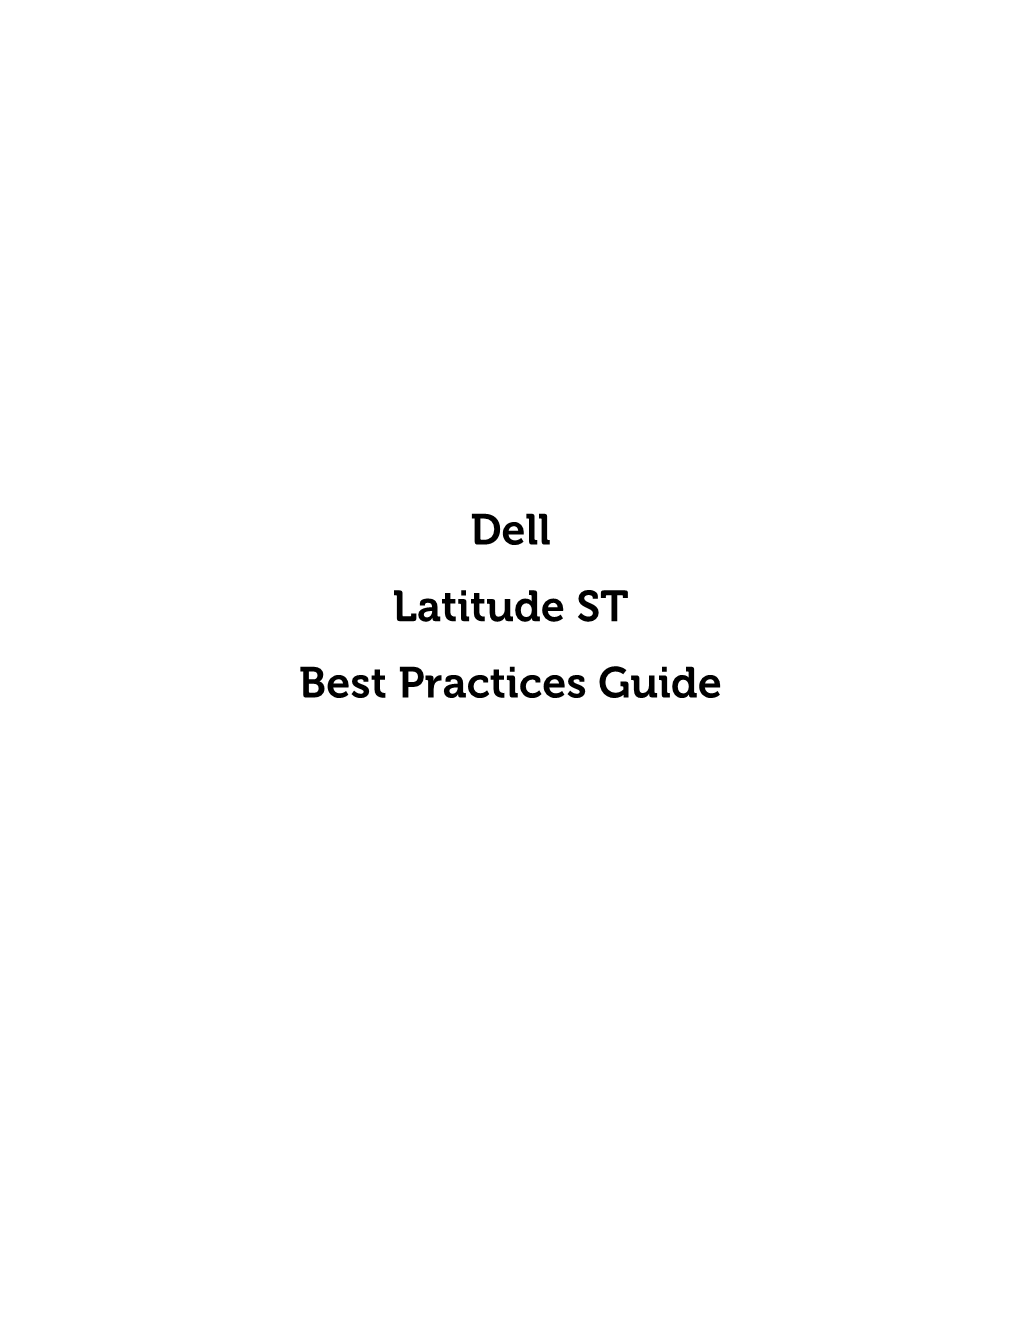 Dell Latitude ST Best Practices Guide